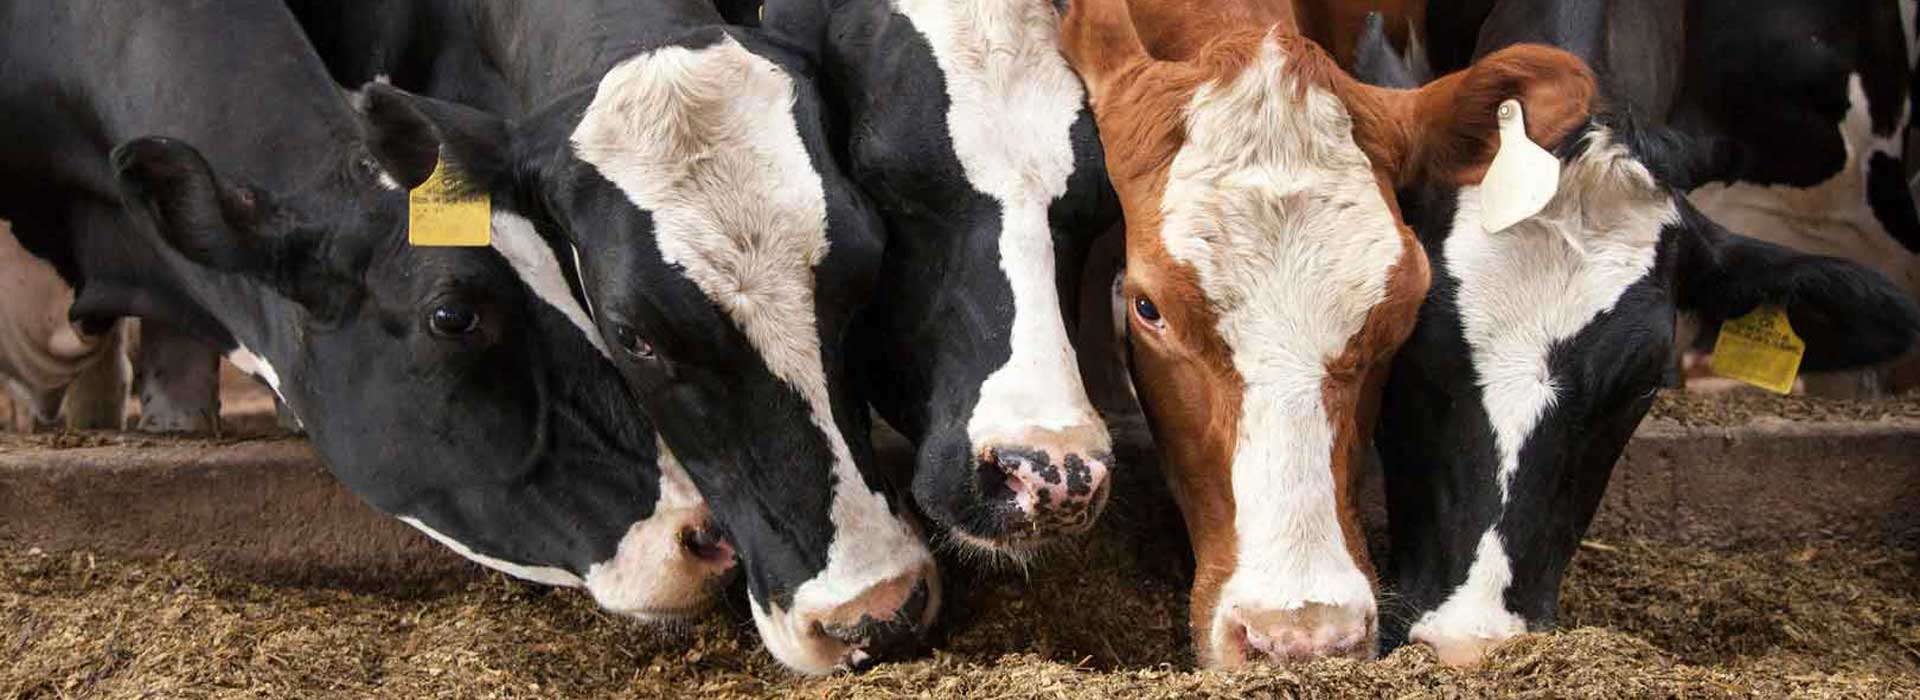 Dairy Cows | Alltech, Working Together for a Planet of Plenty